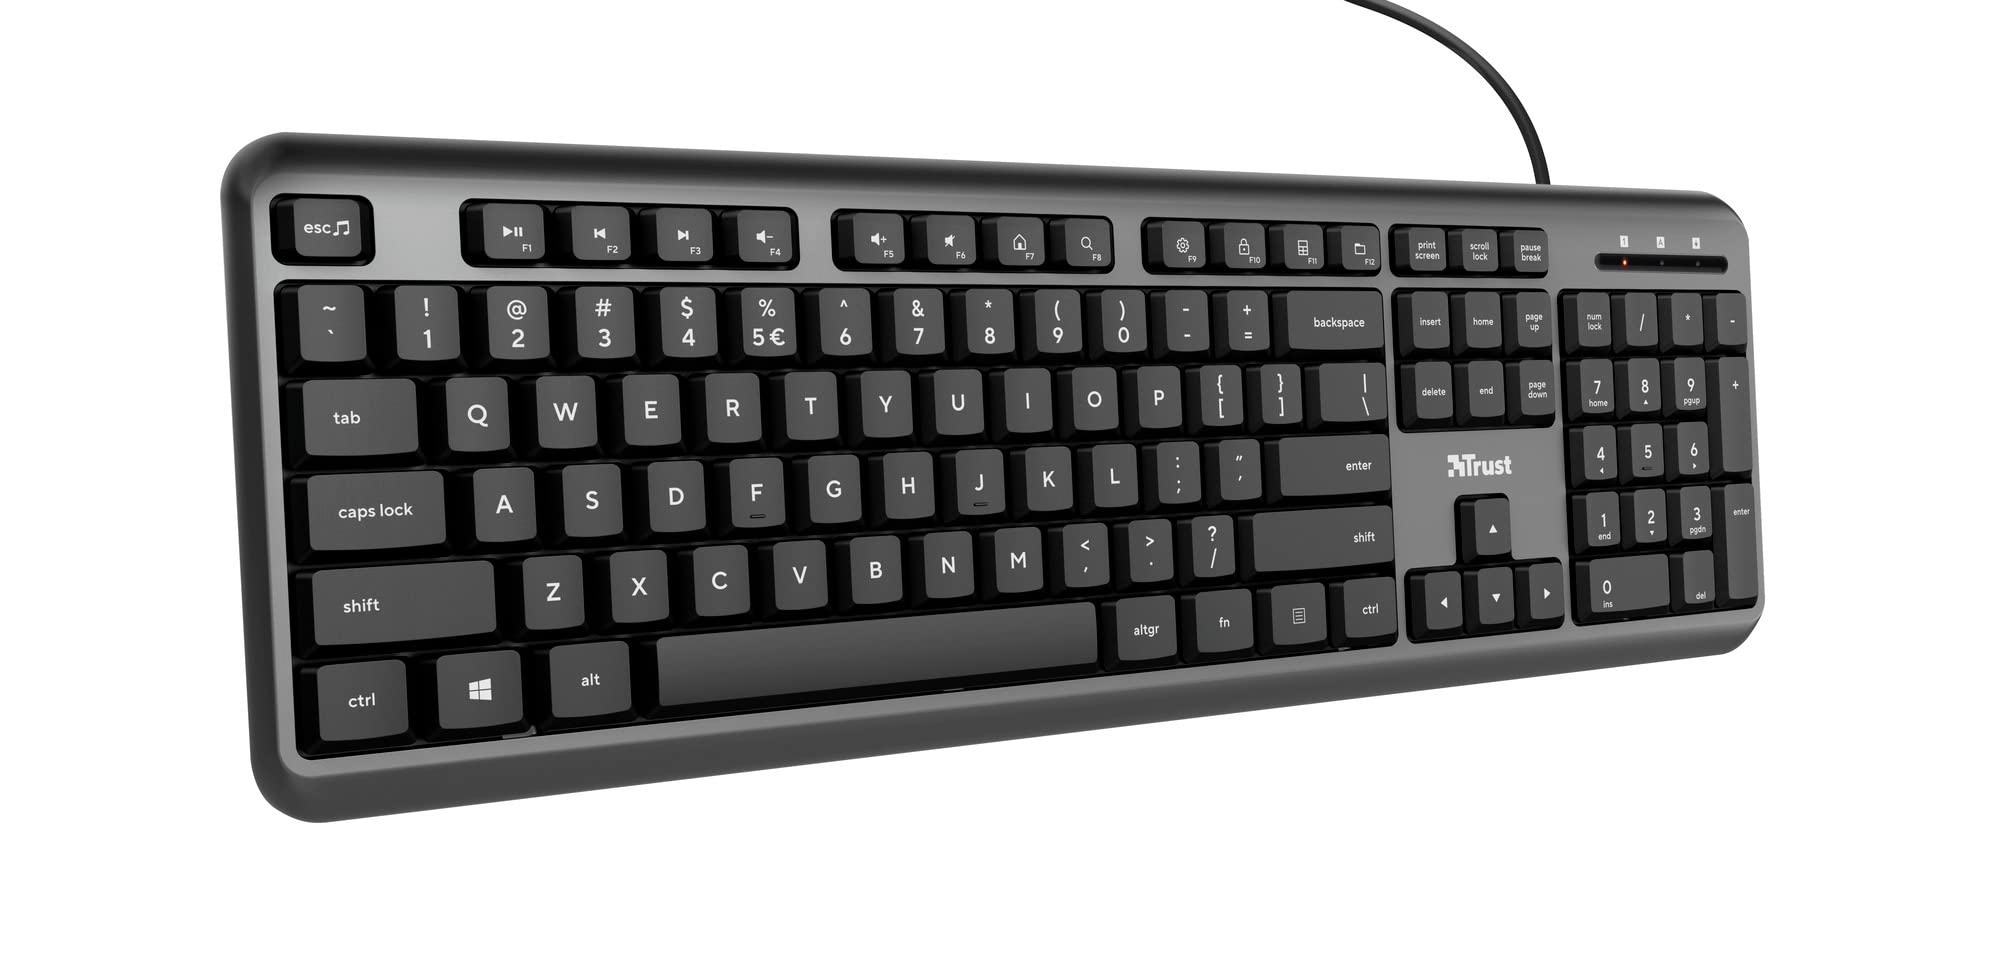 Trust Ody Wired Keyboard, Full-Size Keyboard, QWERTY UK Layout, Silent Keys, Spill-Resistant, 1.8 m Cable, USB Plug and Play, Keyboard for PC, Laptop, Mac - Black